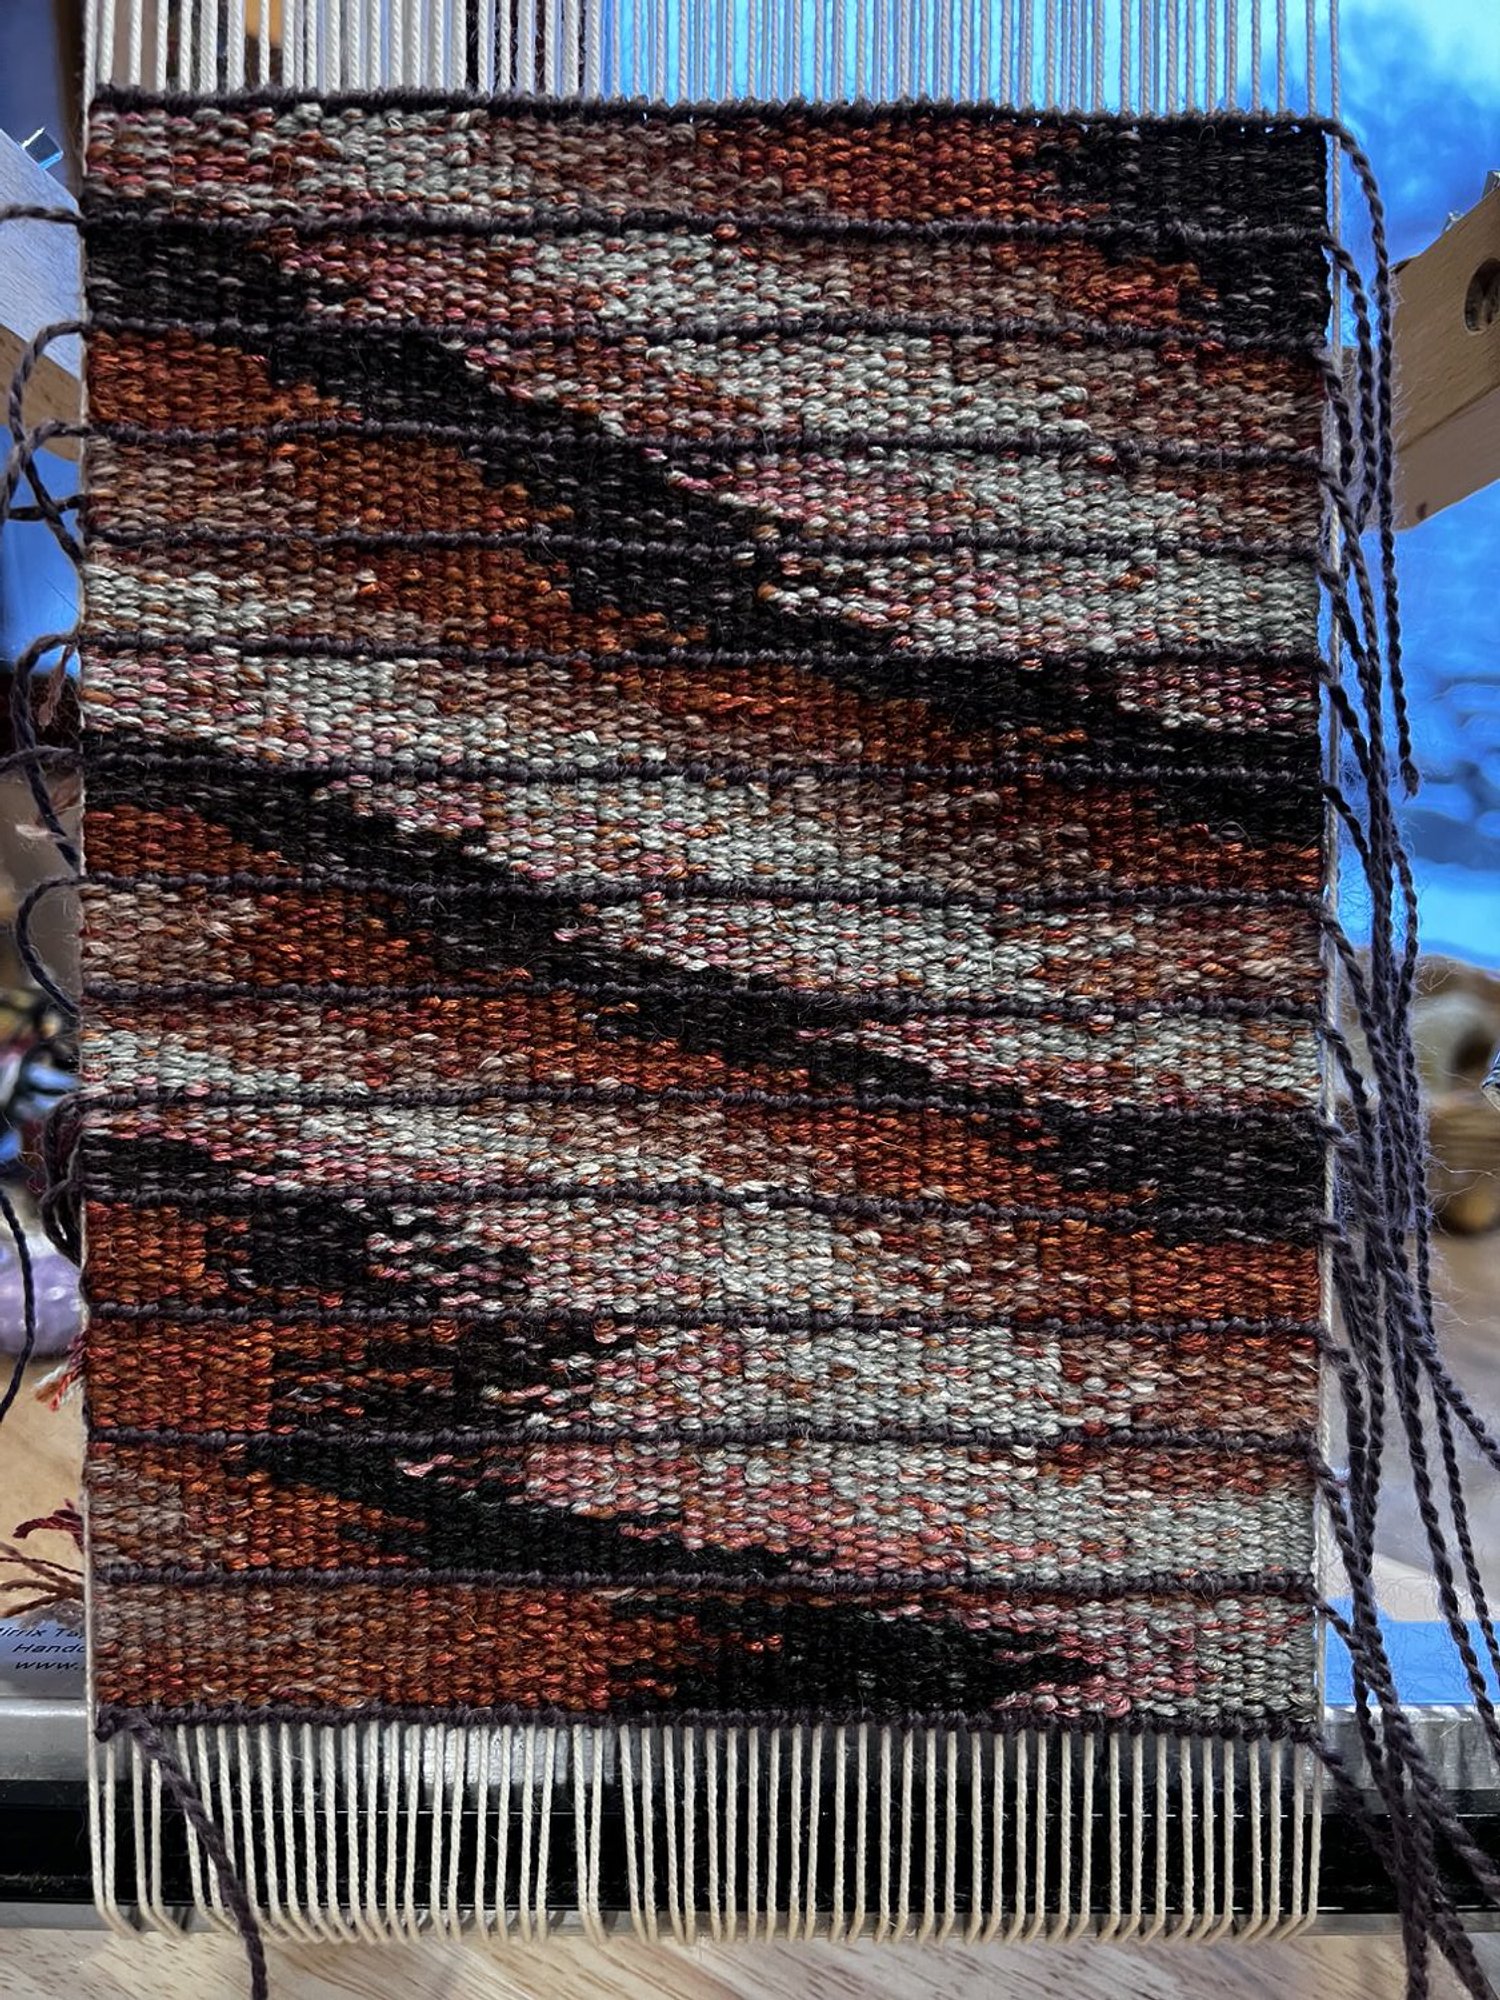 What began as a color study a weaving but was too fun to quit.